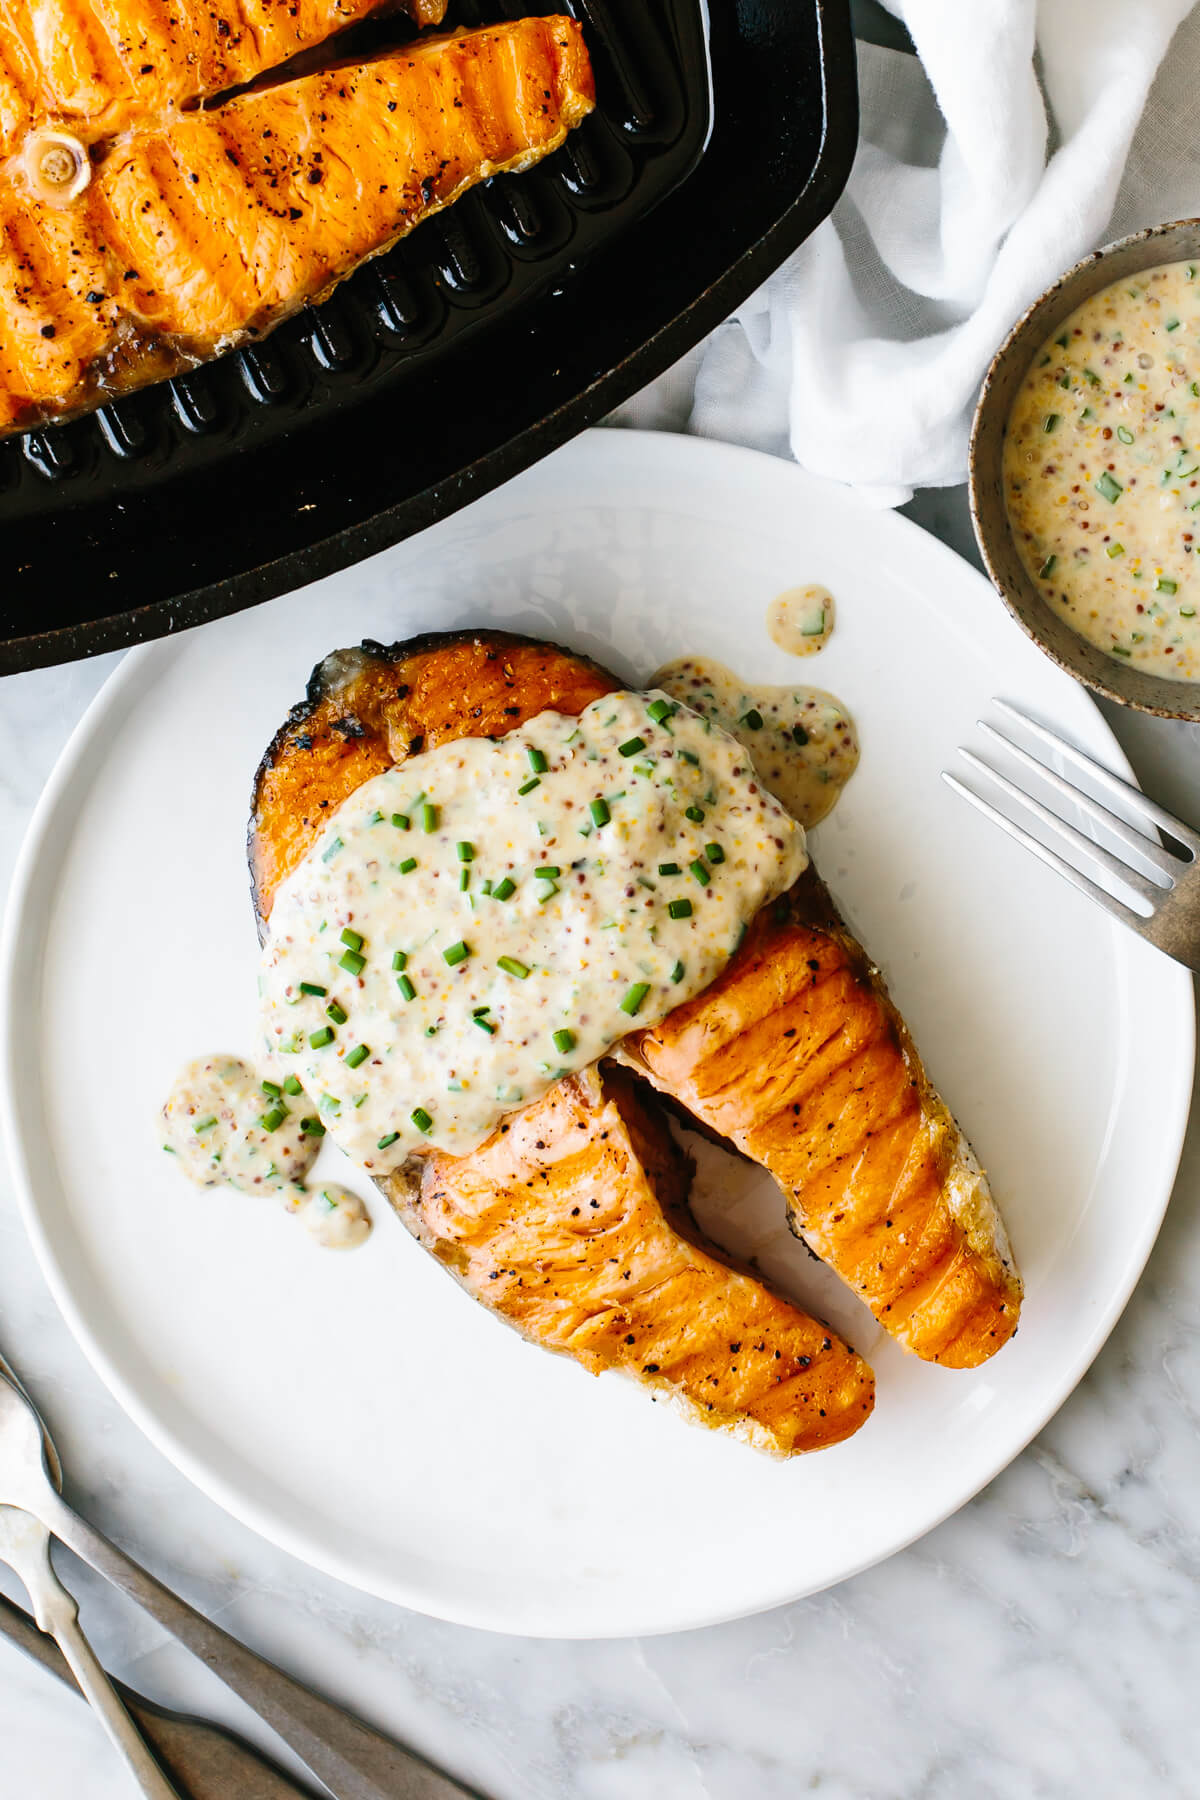 Grilled salmon steak on a plate next to a skillet